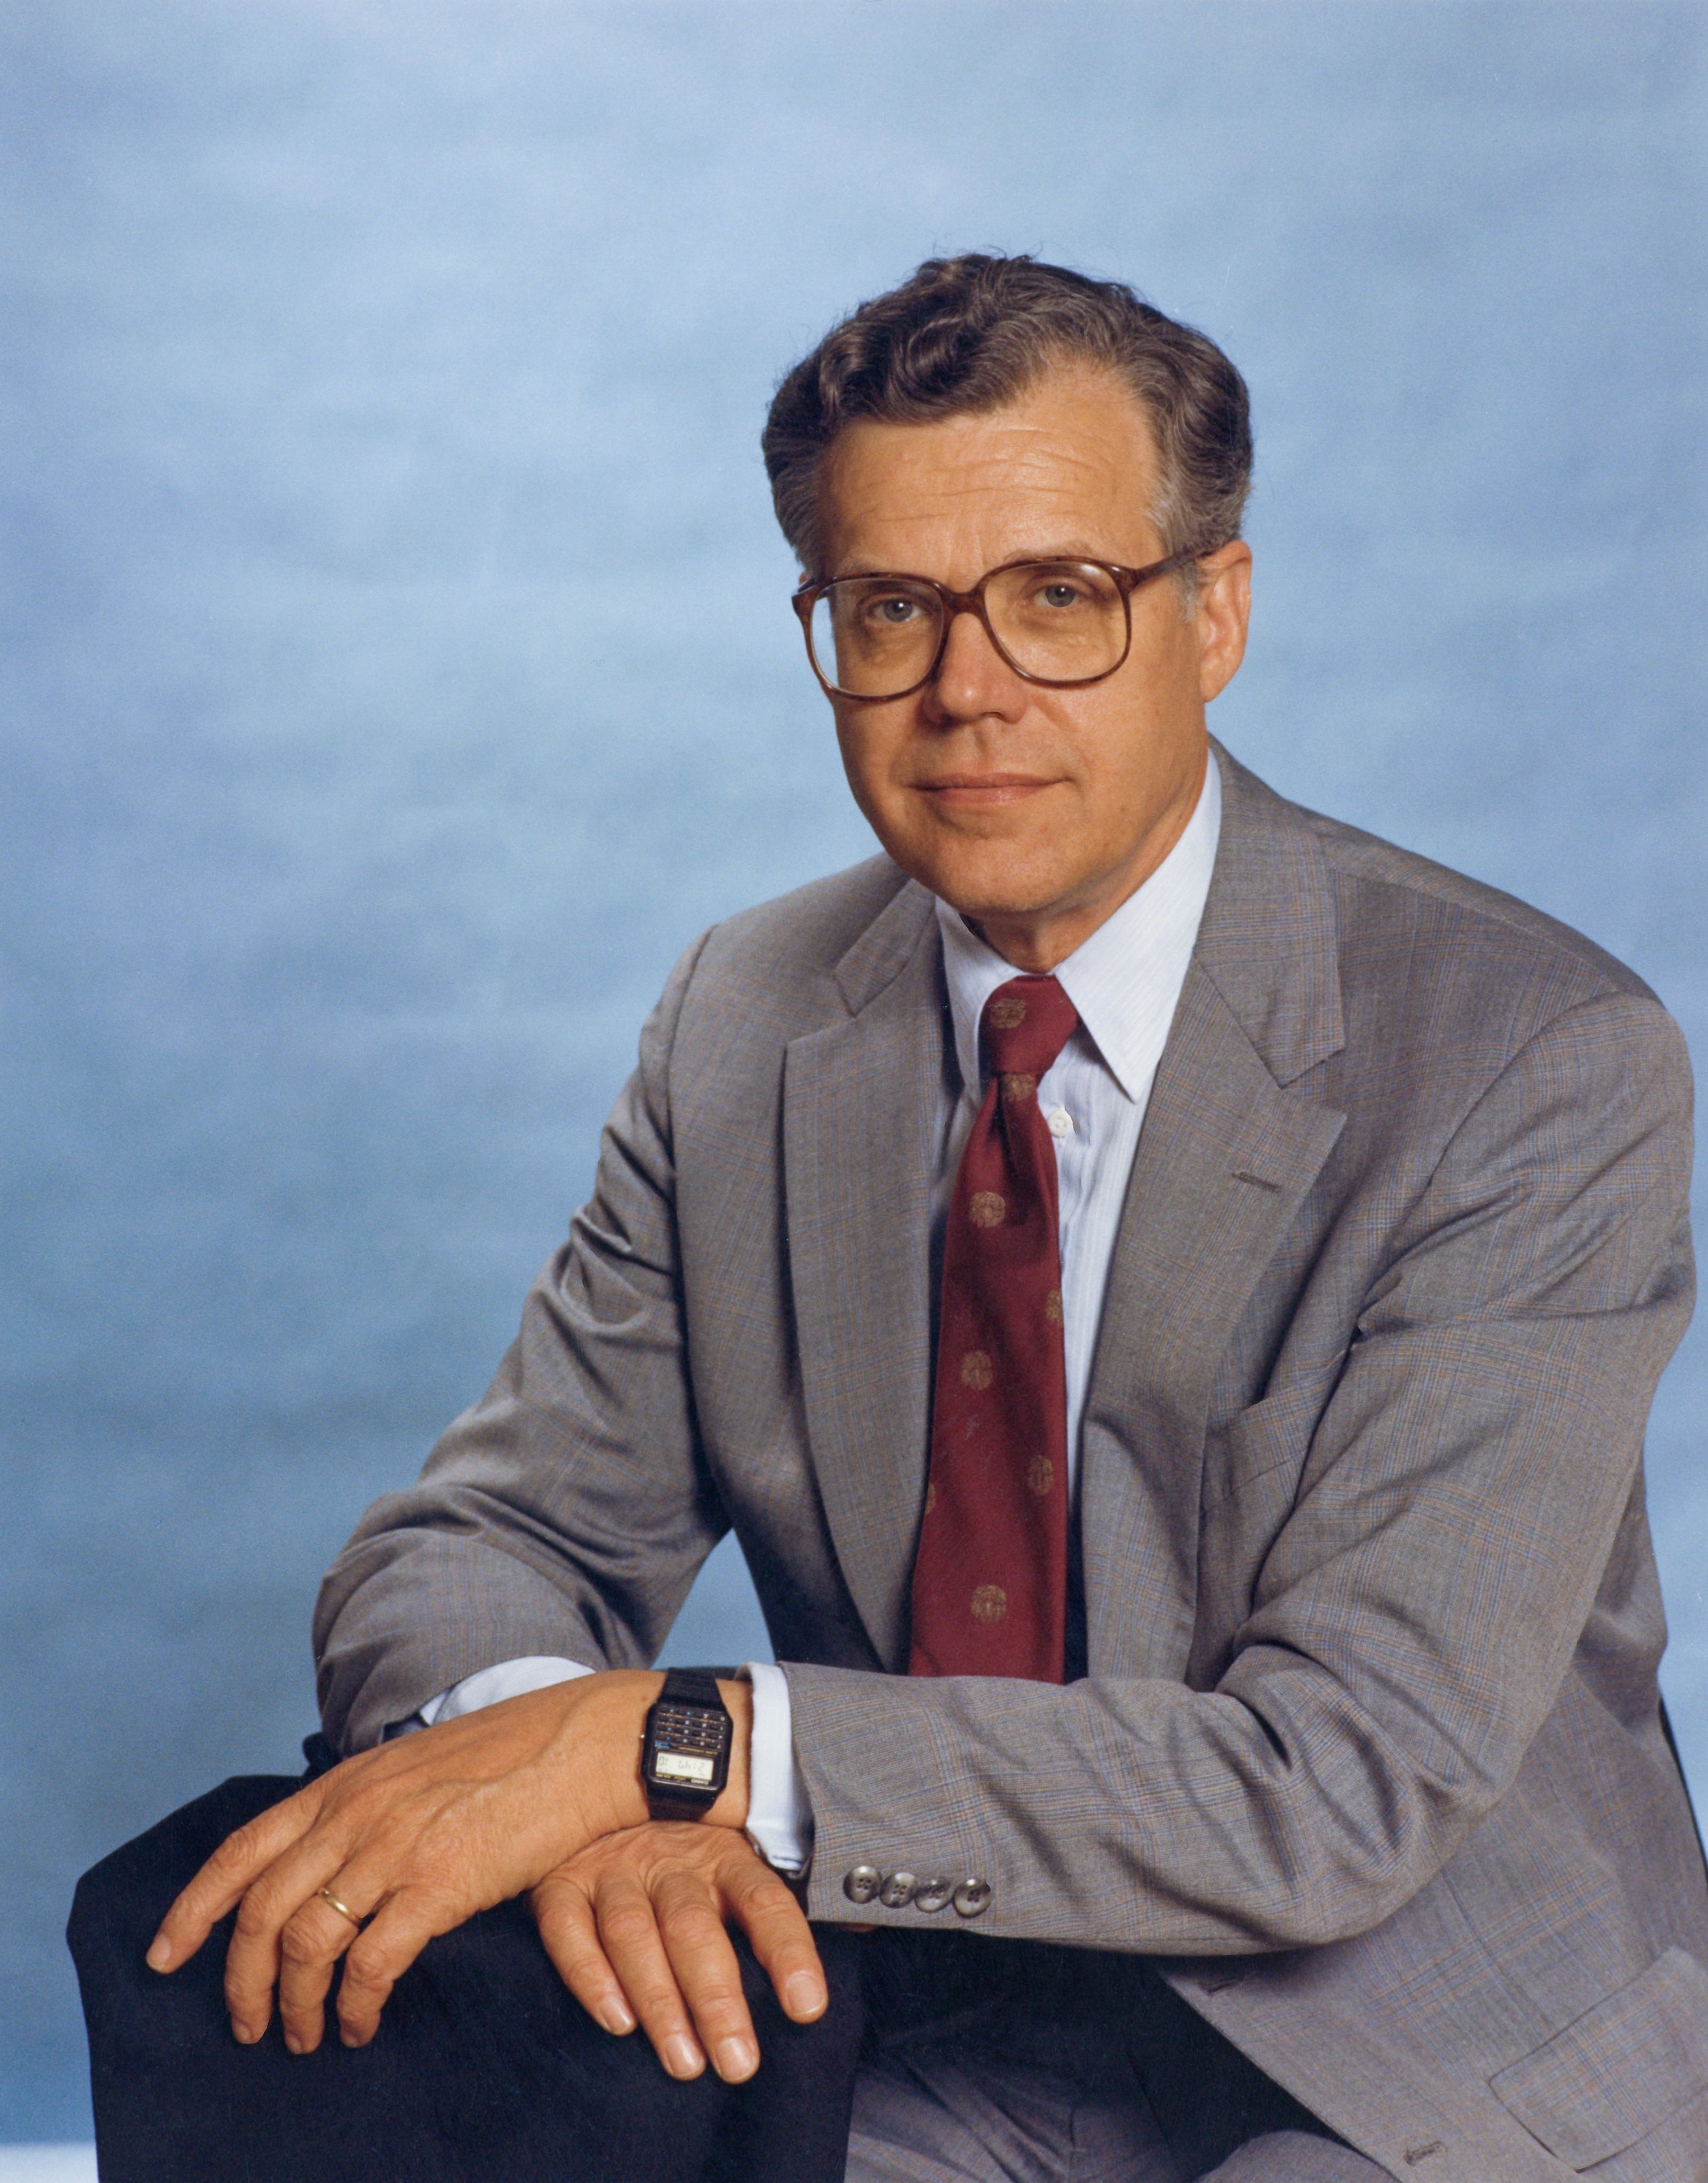 a professional photo of Dr. Paul Parkman in a tan suit with red tie and glasses